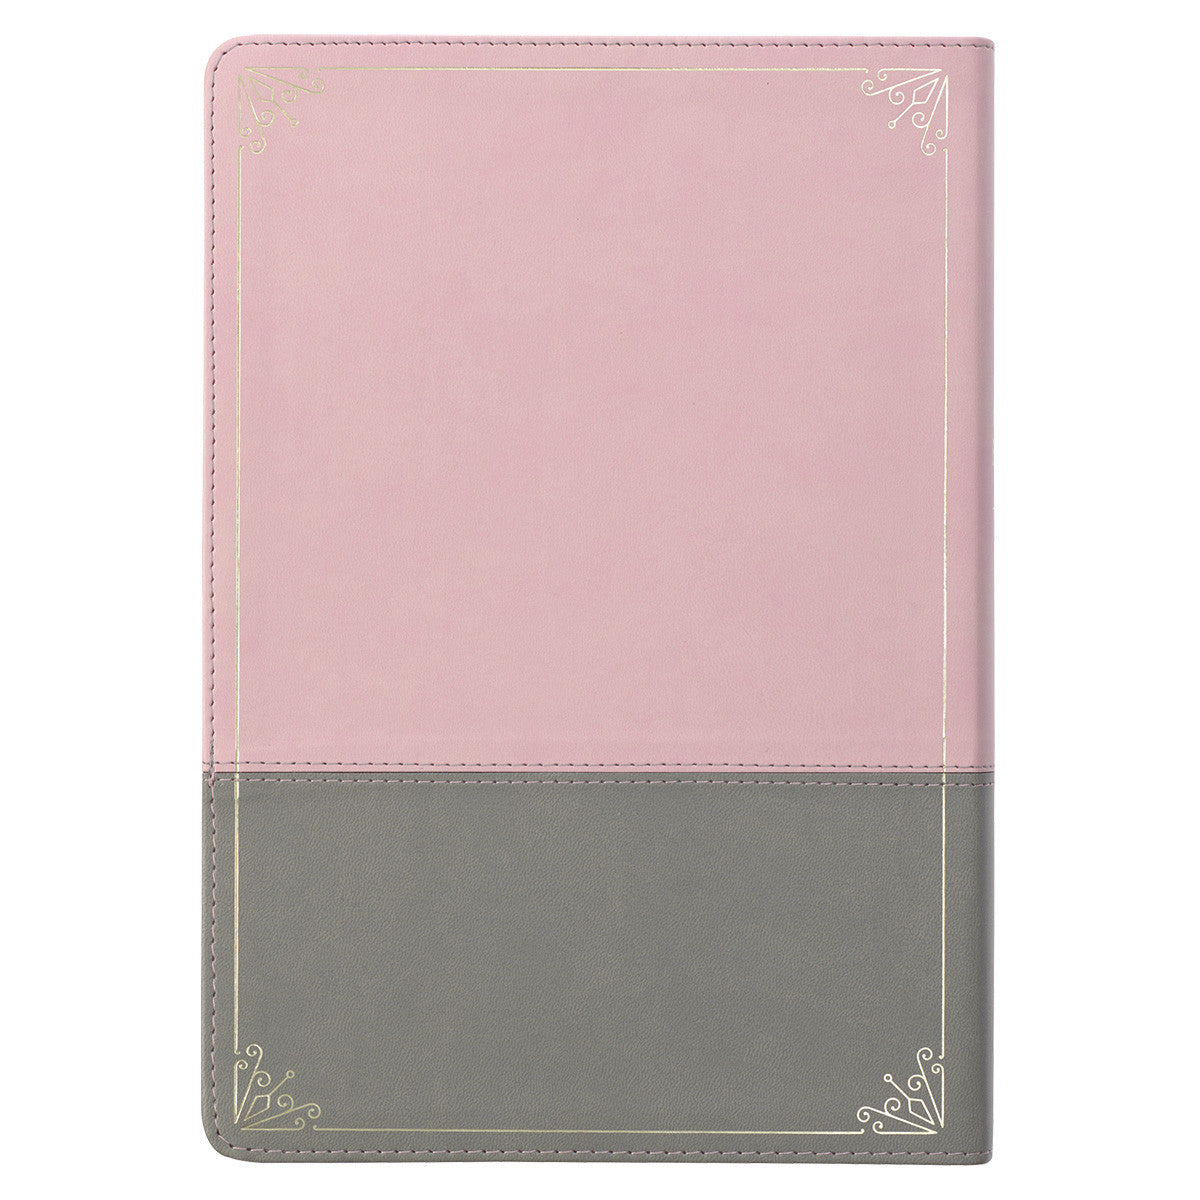 Pink and Grey Faux Leather Super Giant Print Full-size King James Version Bible with Thumb Index - The Christian Gift Company